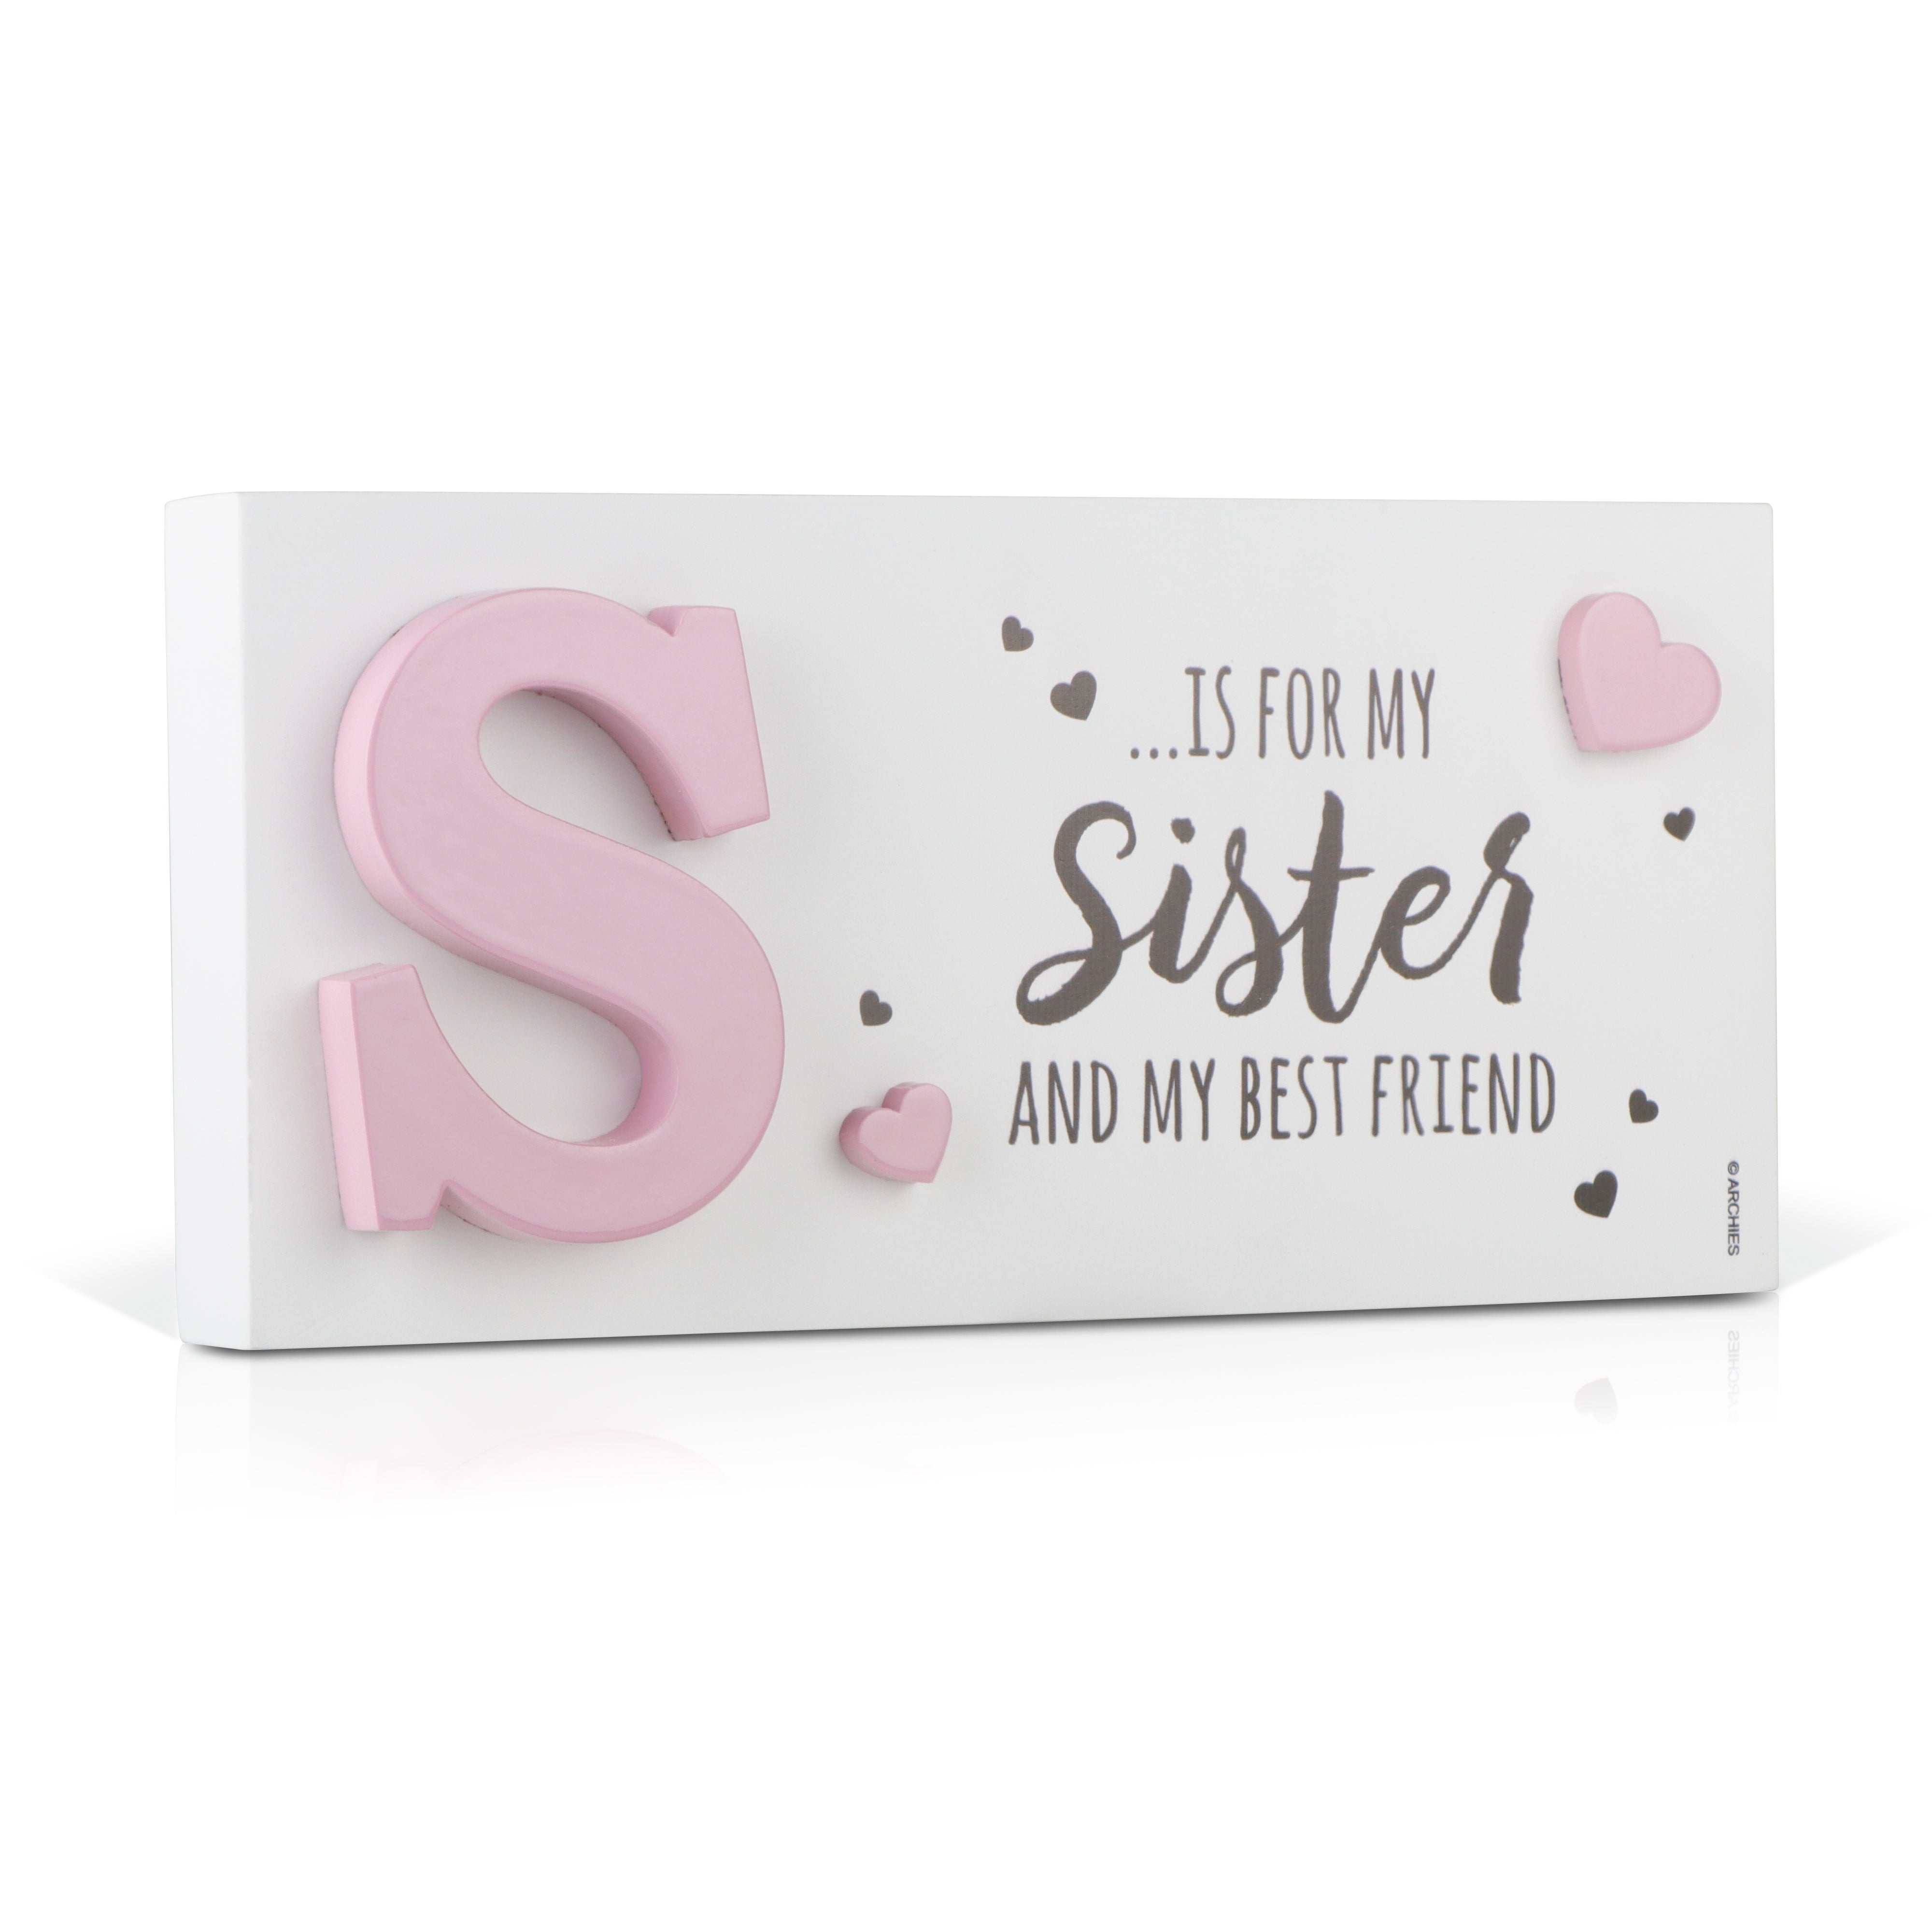 Archies | Archies KEEP SAKE Sister Gift Combo with Ceramic Mug and Elevated Initial Quotation - with a FREE GREETING CARD 7